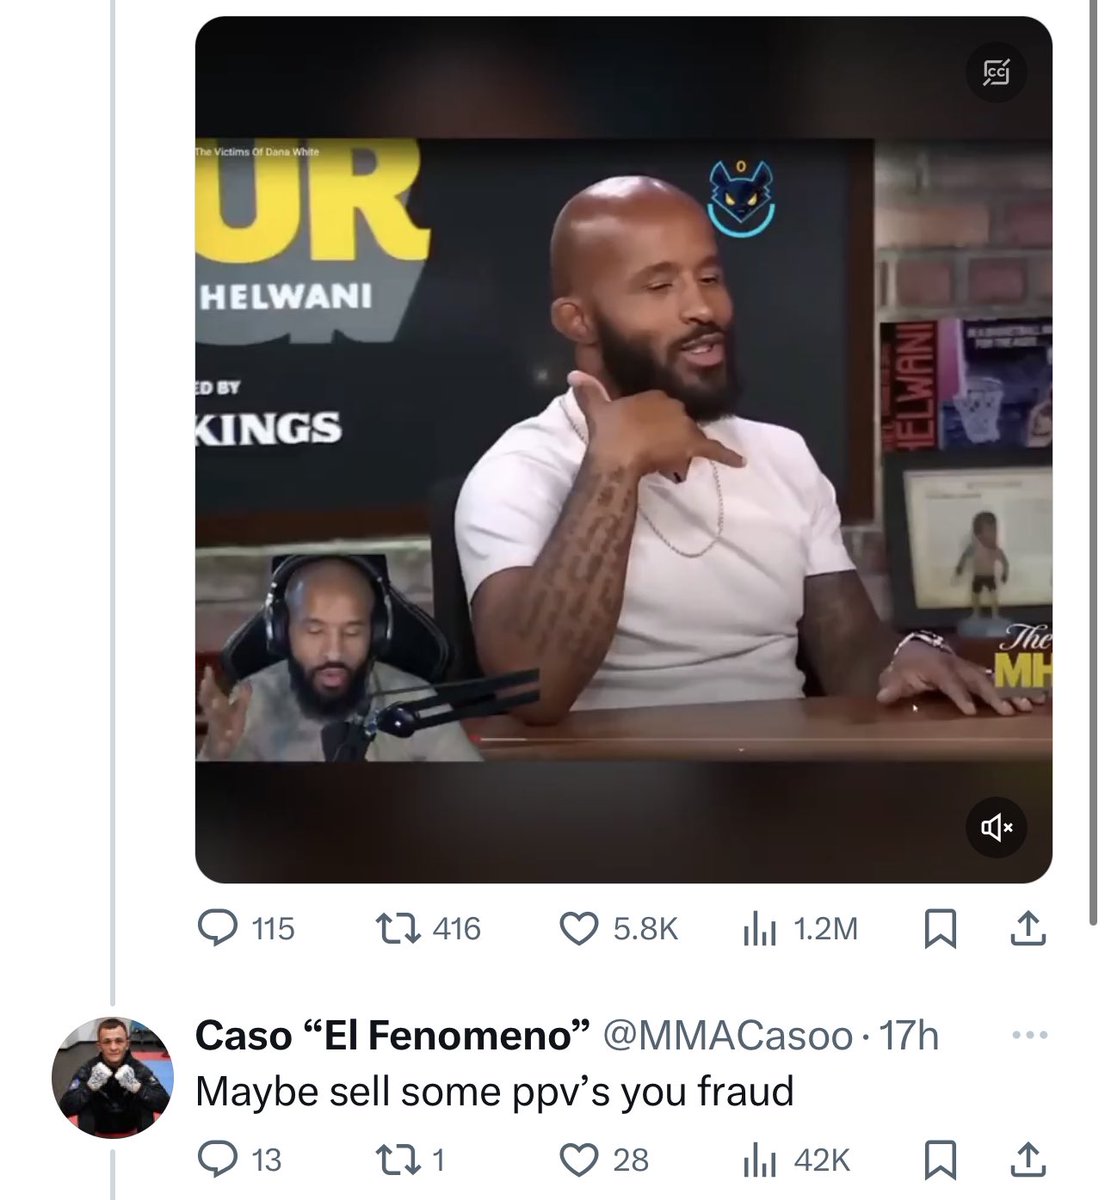 How disconnected can a fan be calling DJ a fraud? 🚨🚨🚨